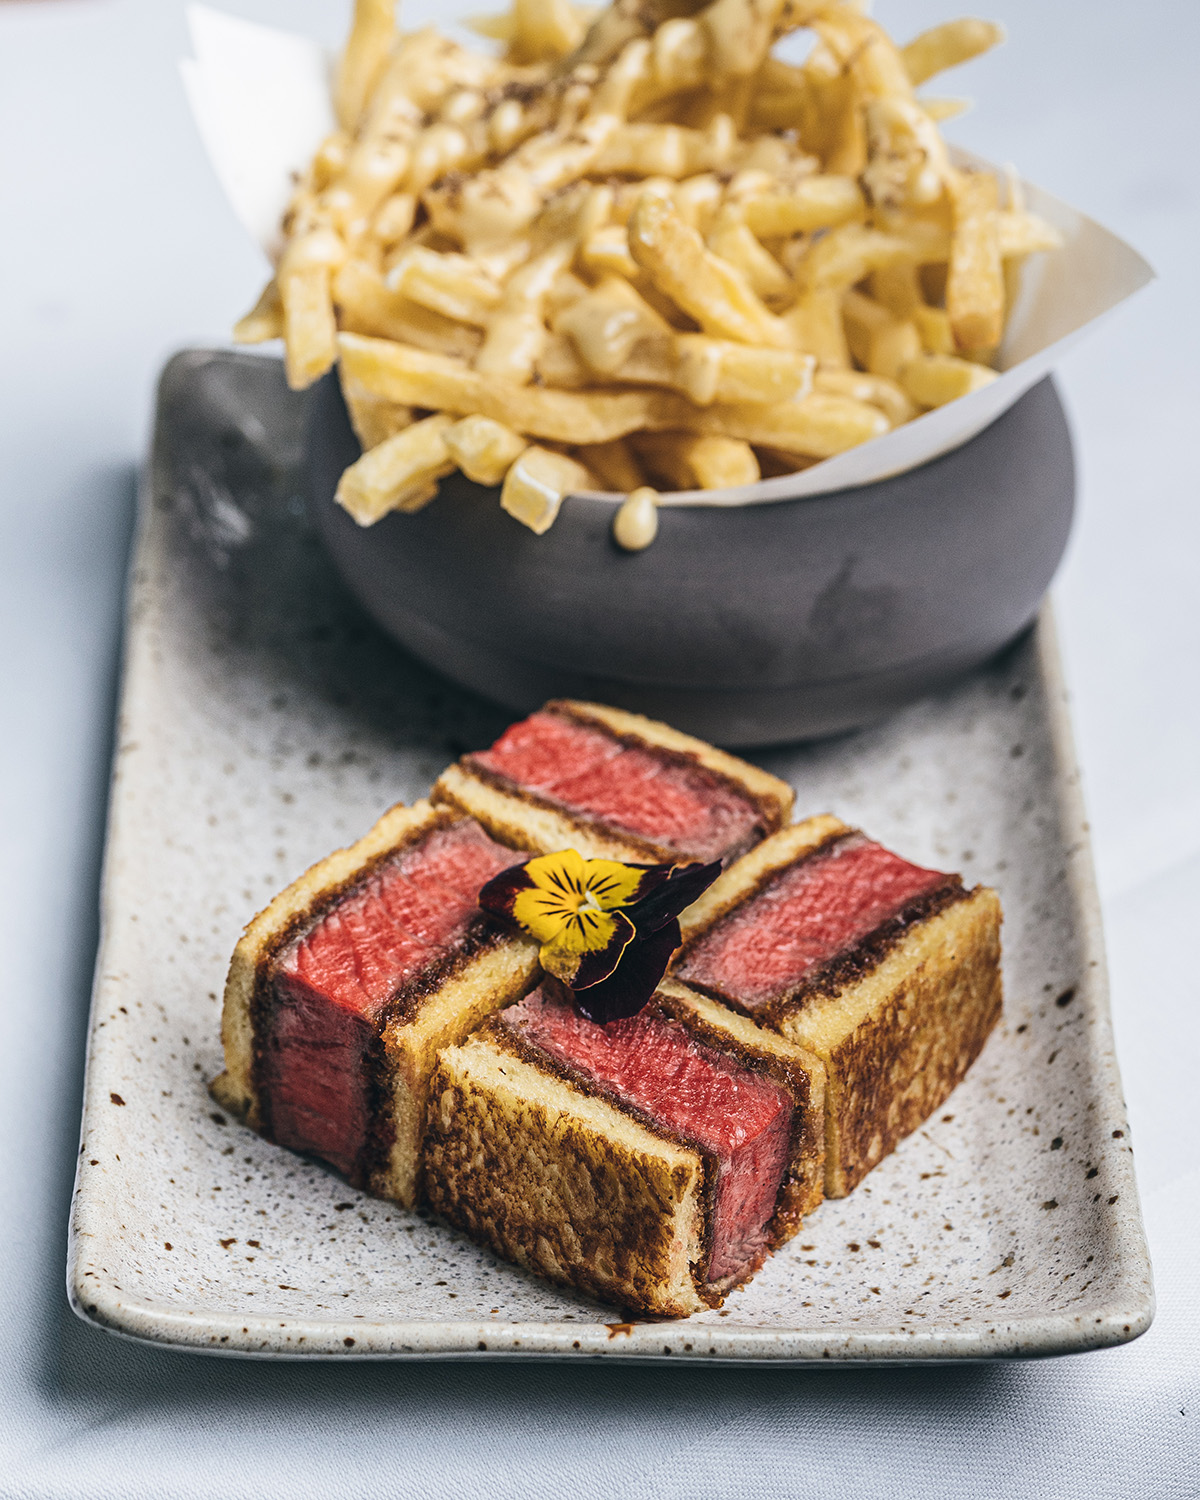 A cut up steak sandwich into a square with a bowl of french fries